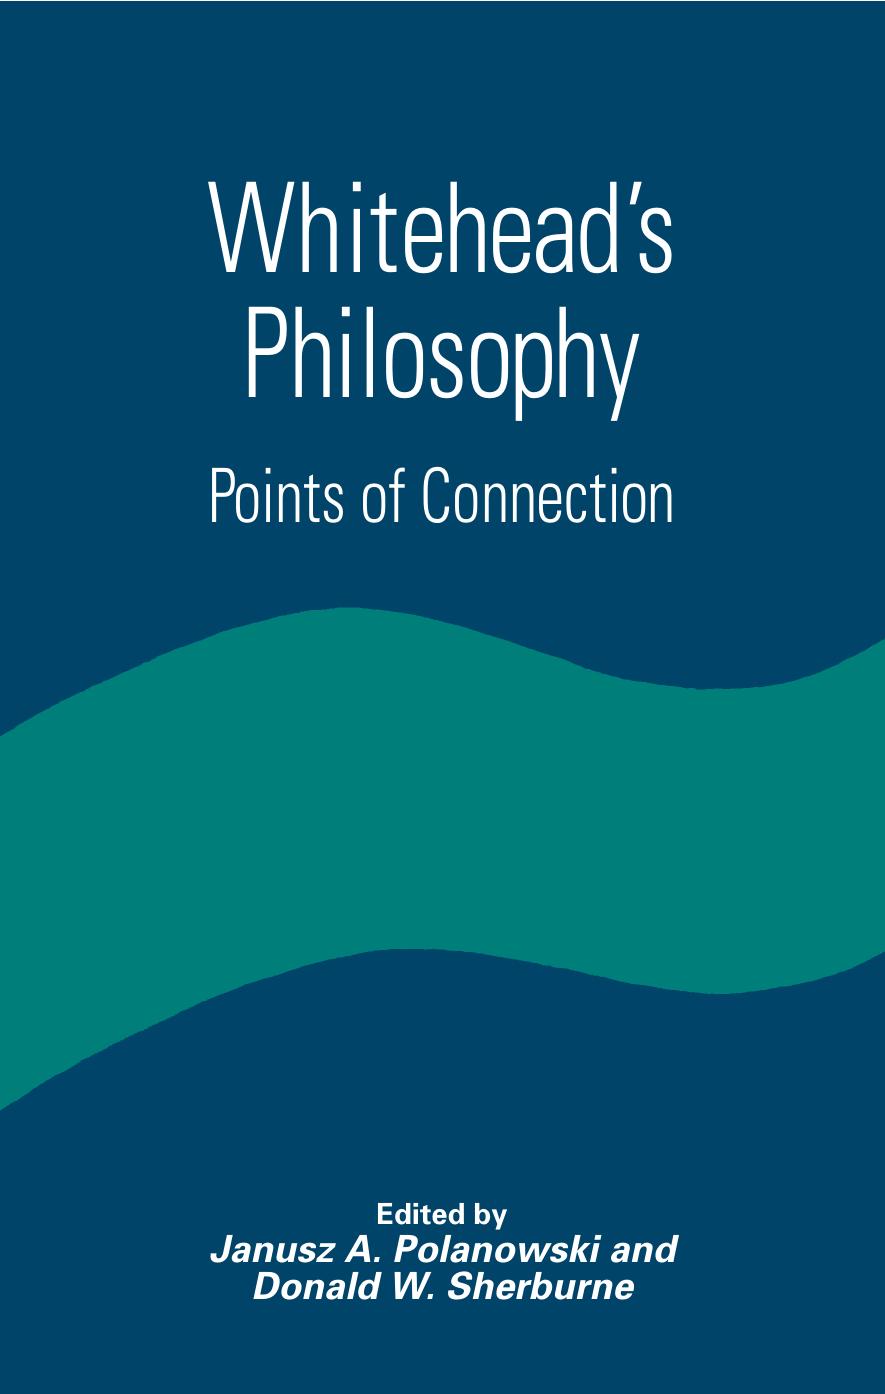 Whitehead's Philosophy: Points of Connection